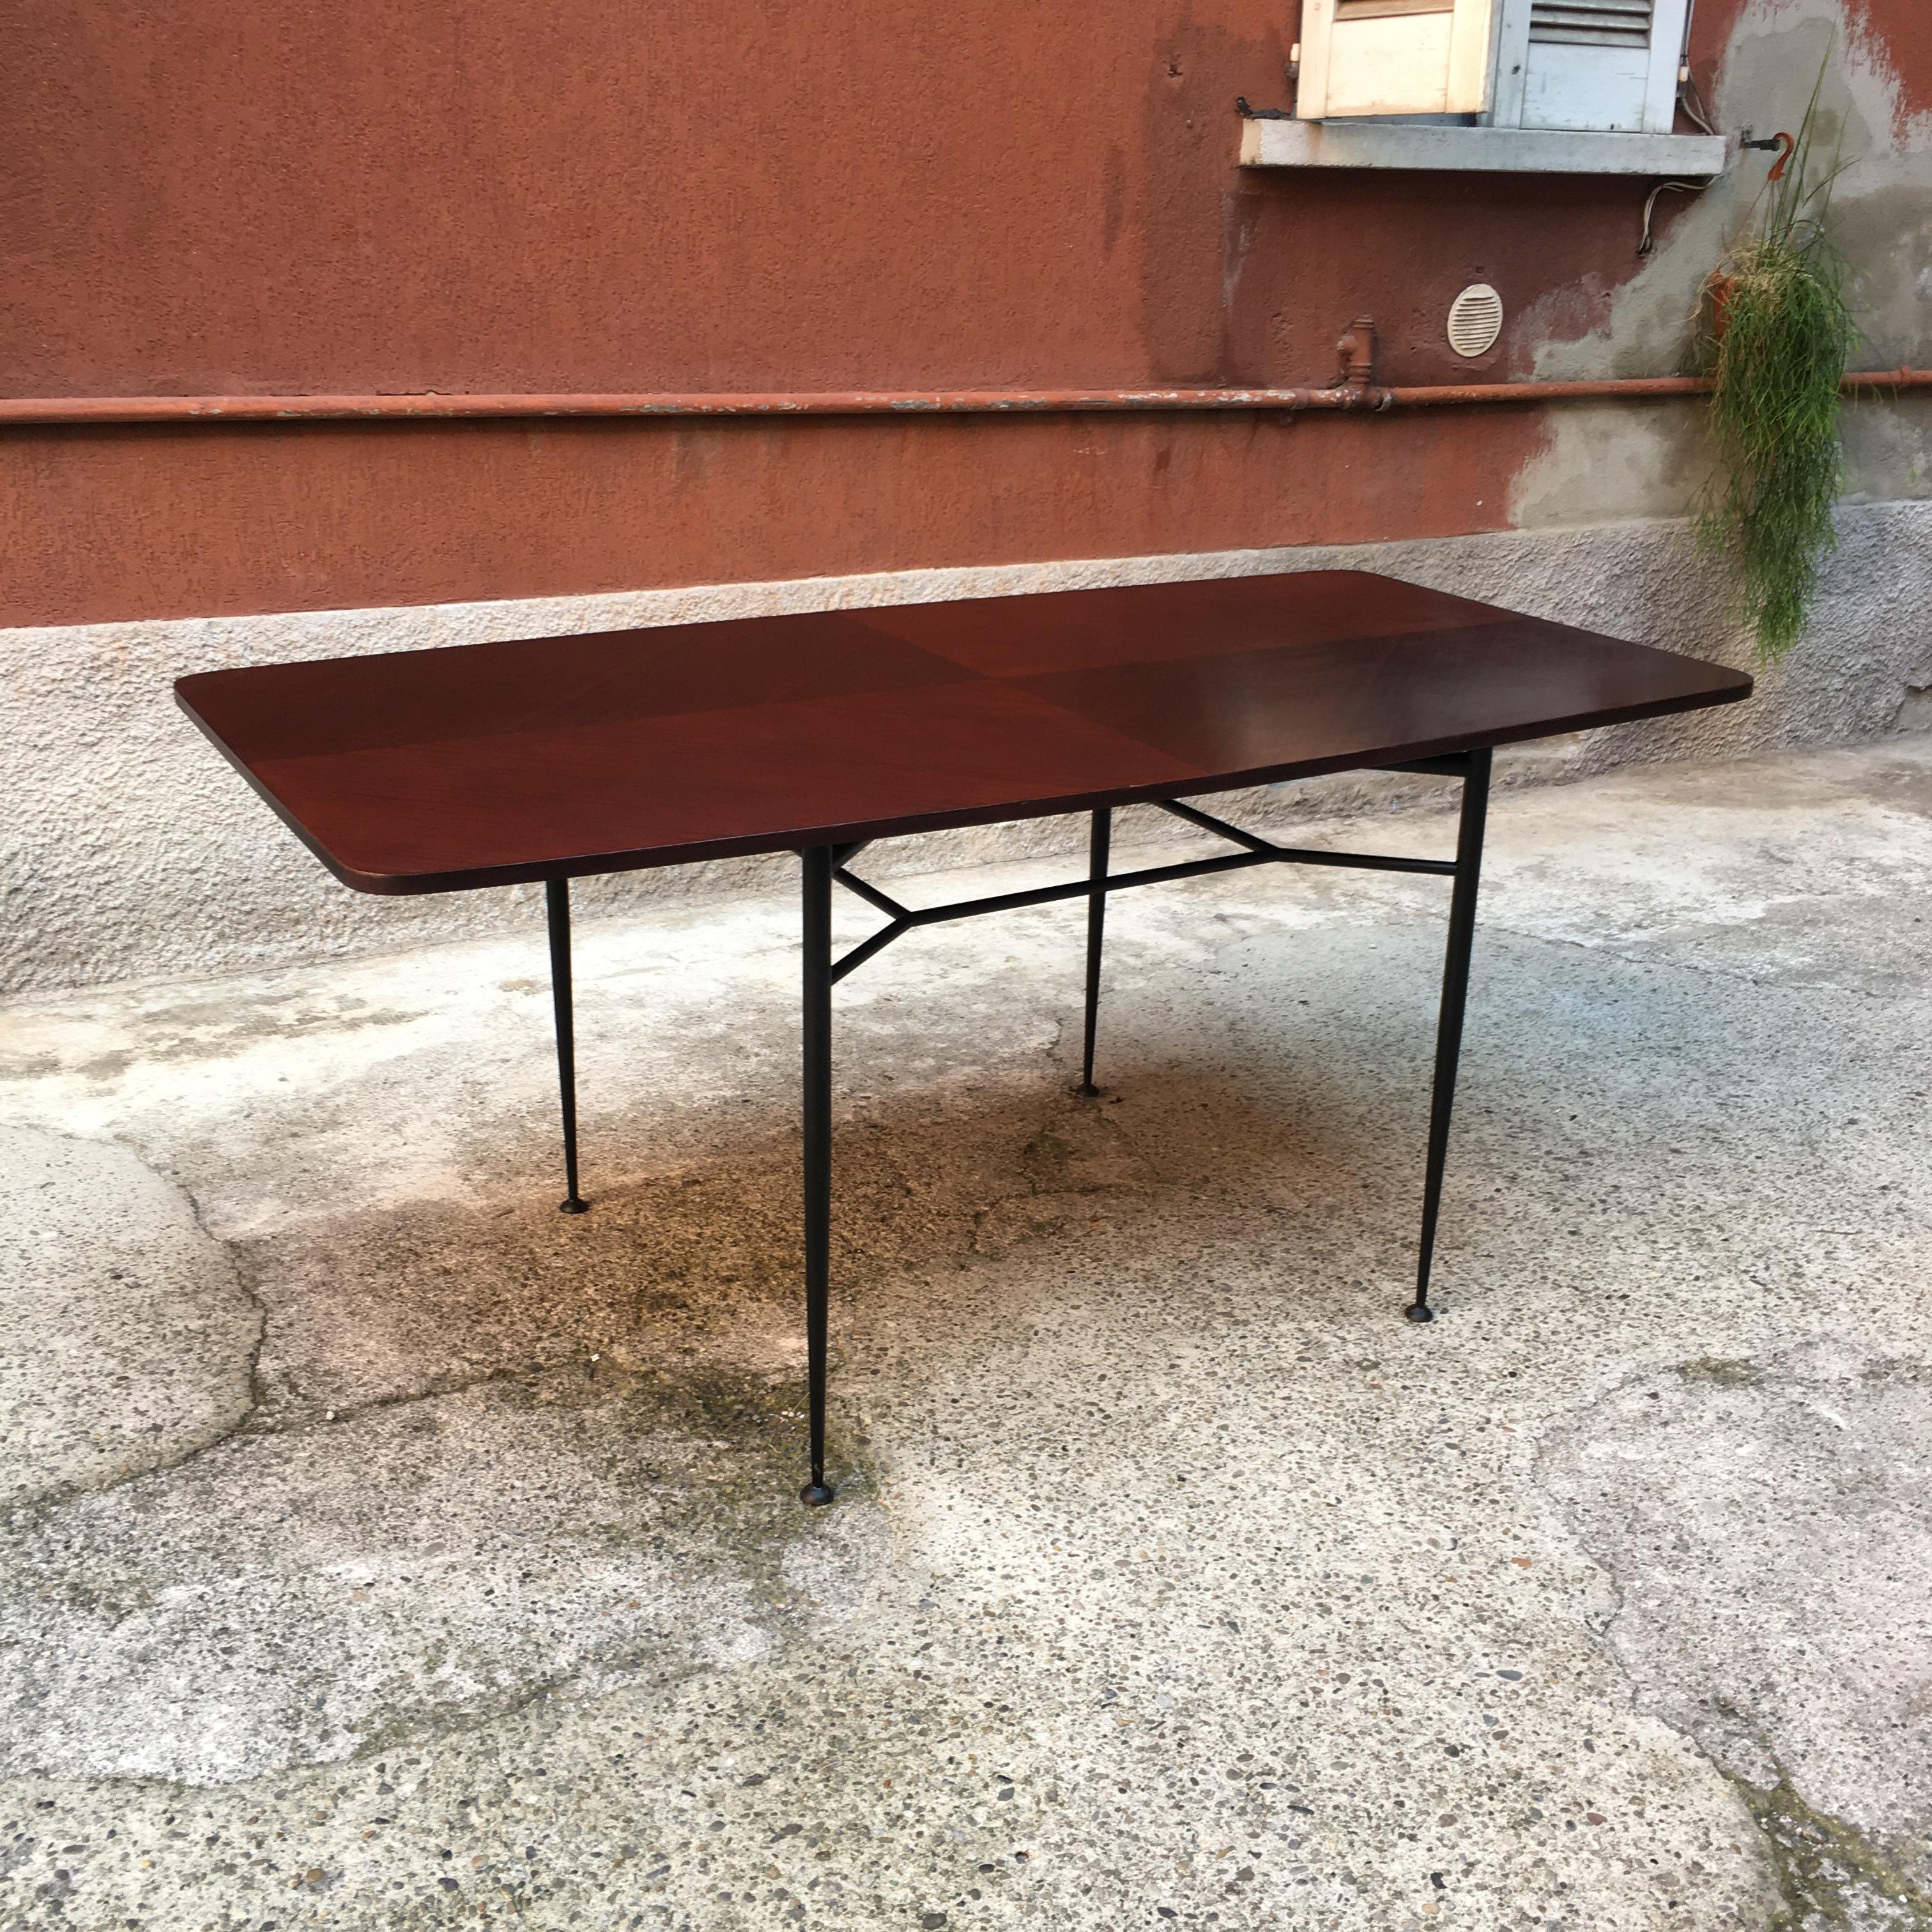 Italian Rosewood Top and Black Metal Paw Dining Table, 1960s
Rosewood rectangular top table with rounded corners, concentric pattern on the wood and black metal paw
Restored and in perfect condition.